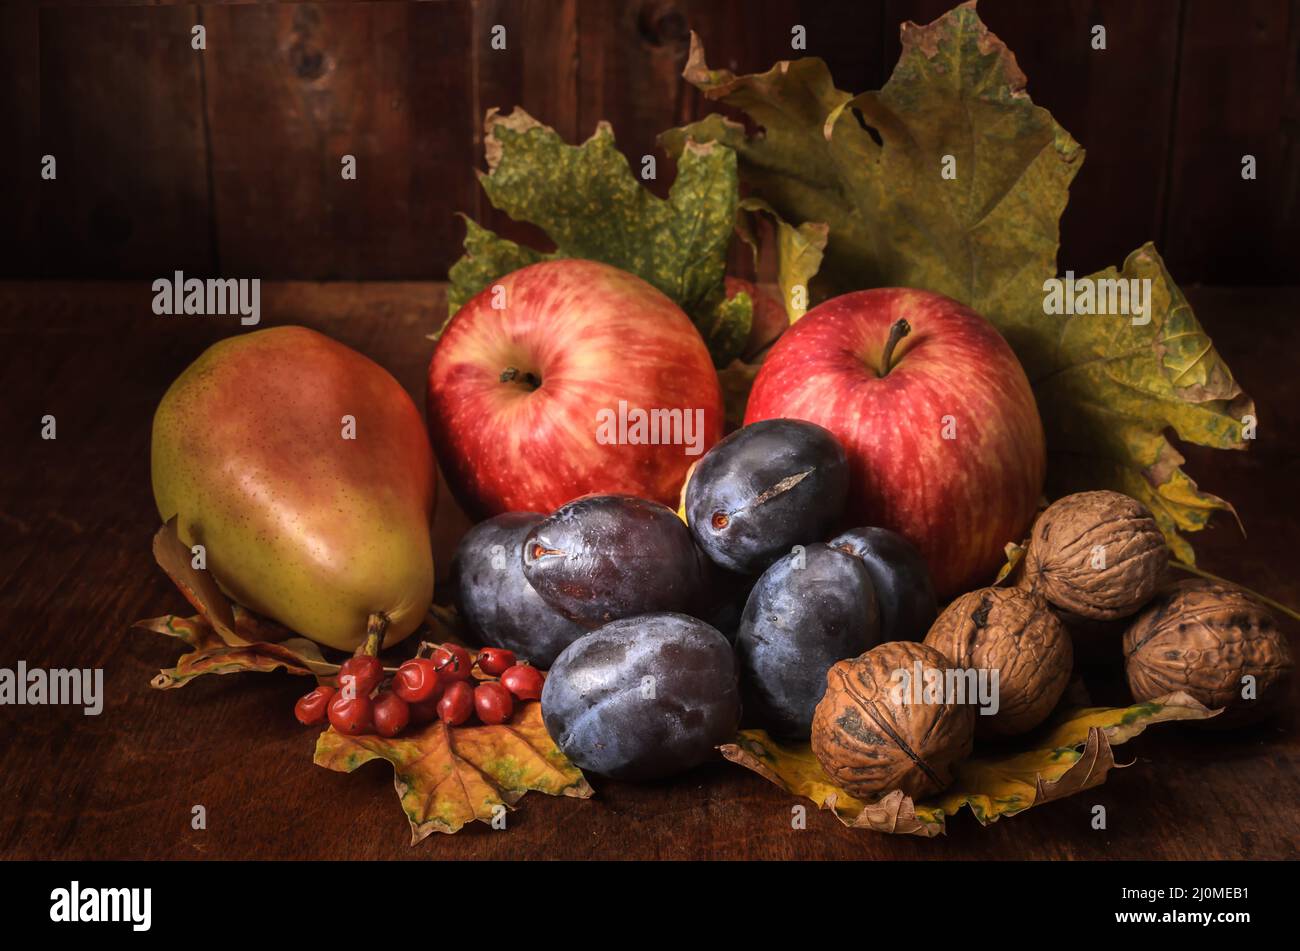 Fruits in bulk on a dark wooden background in a rustic style Stock Photo